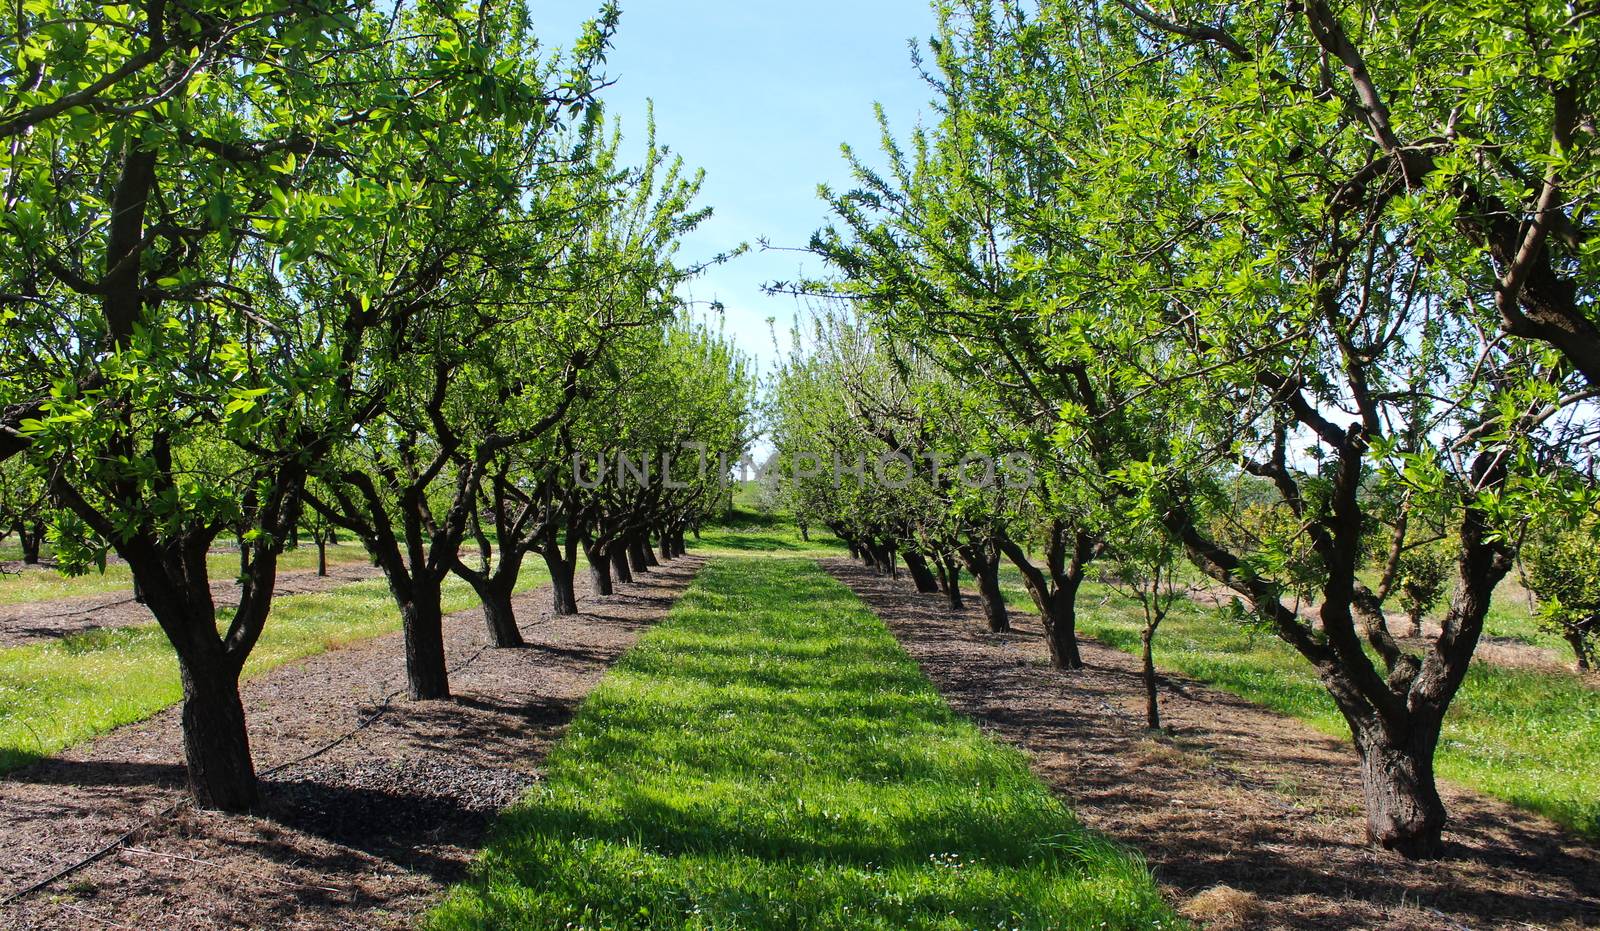 Orchard in the spring before almond blossoms. Between two rows of almond trees. Professional conventional almond orchard. Beja, Portugal.